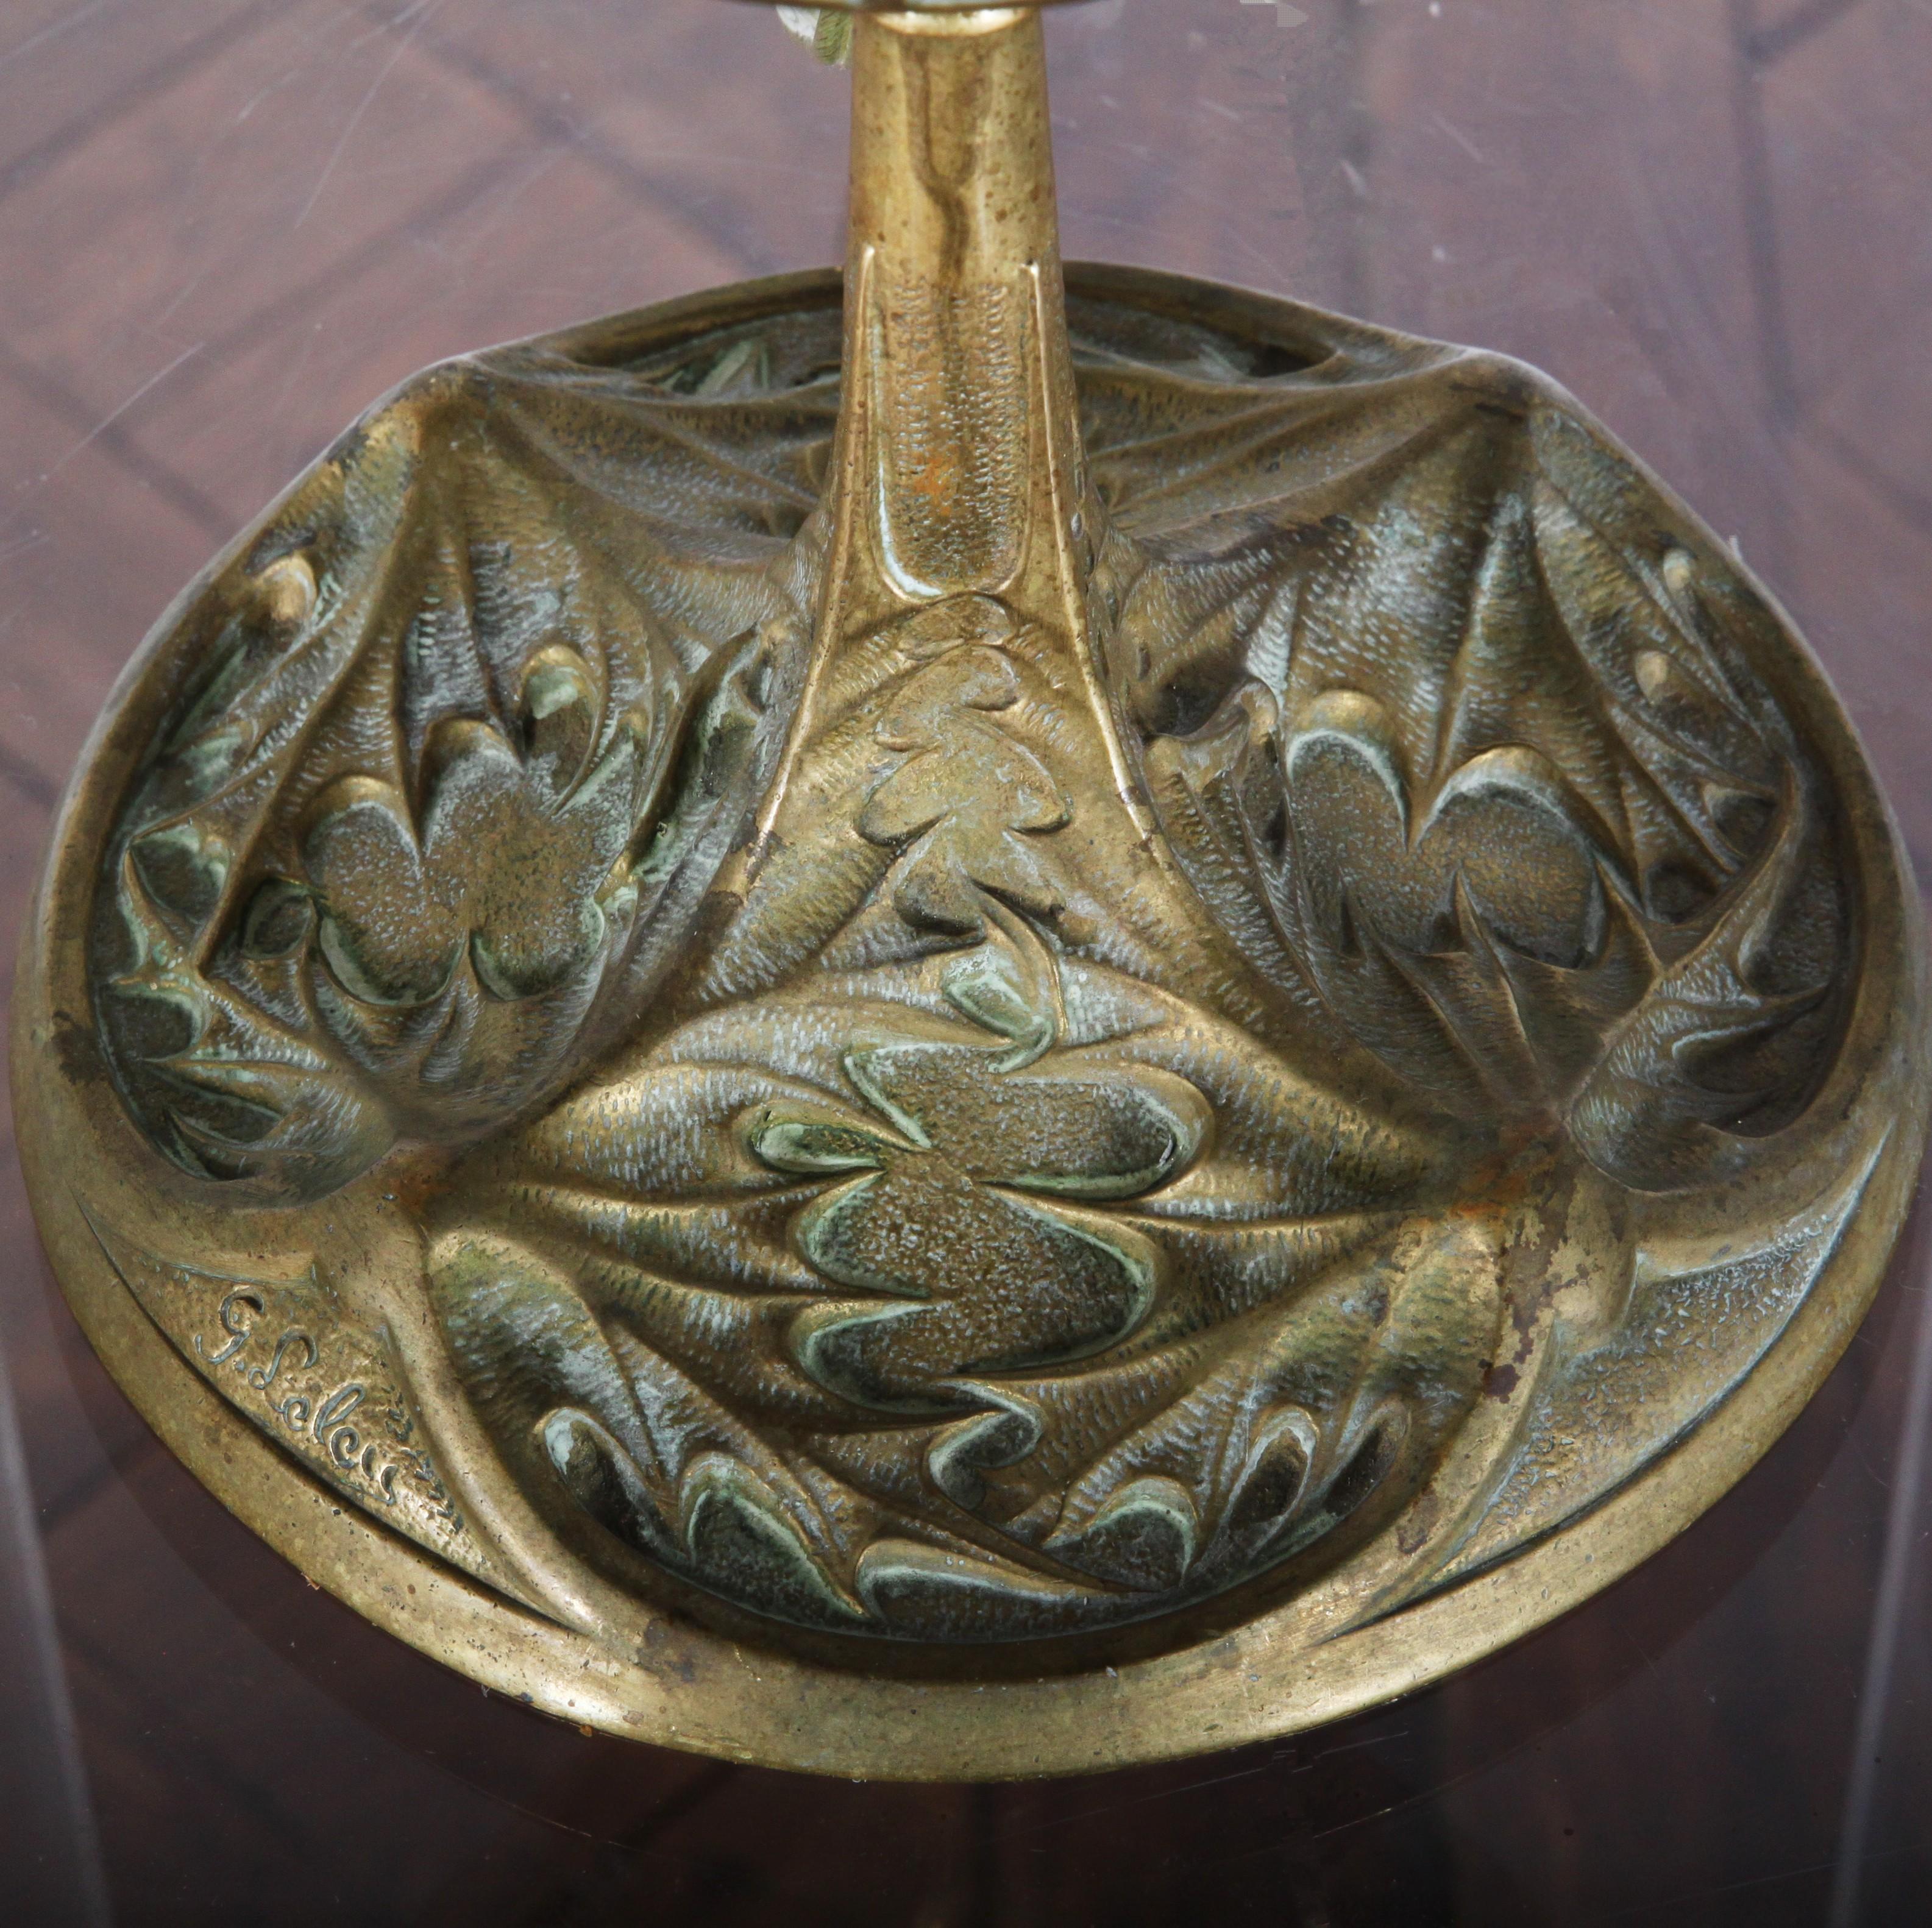 A French Art Nouveau period brass oil lamp newly-rewired to modern standards. Textured brass dome with inset opalescent glass cabochons above a tautly-sculpted organic Art Nouveau base. Signed J. Leleu. 

Jules Leleu (June 17, 1883–1961) was a